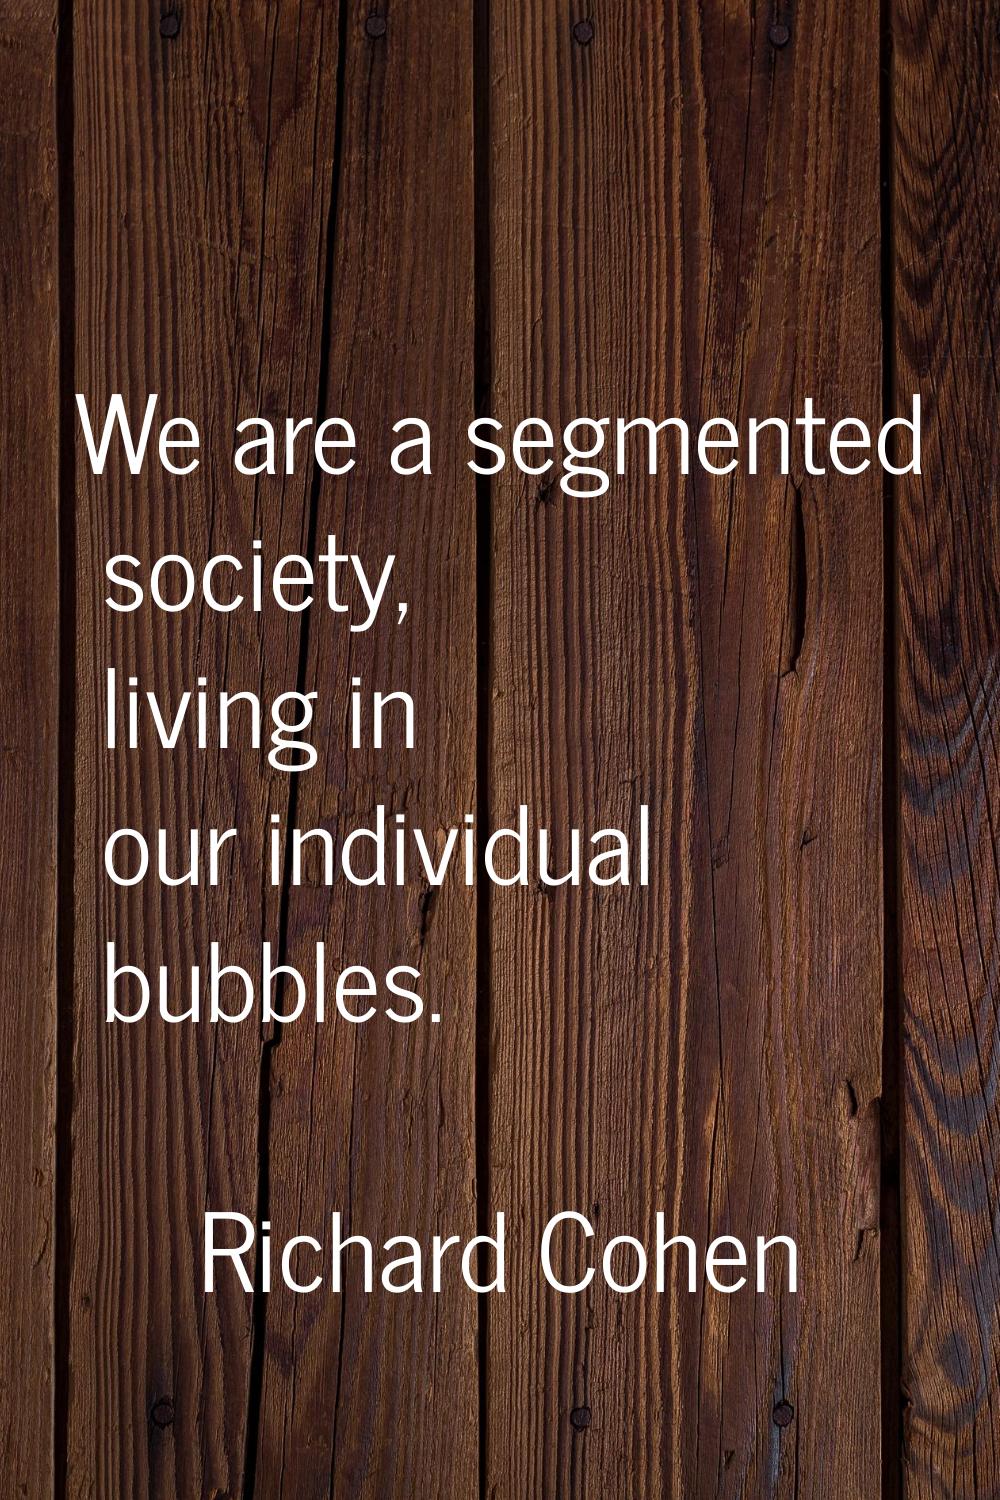 We are a segmented society, living in our individual bubbles.